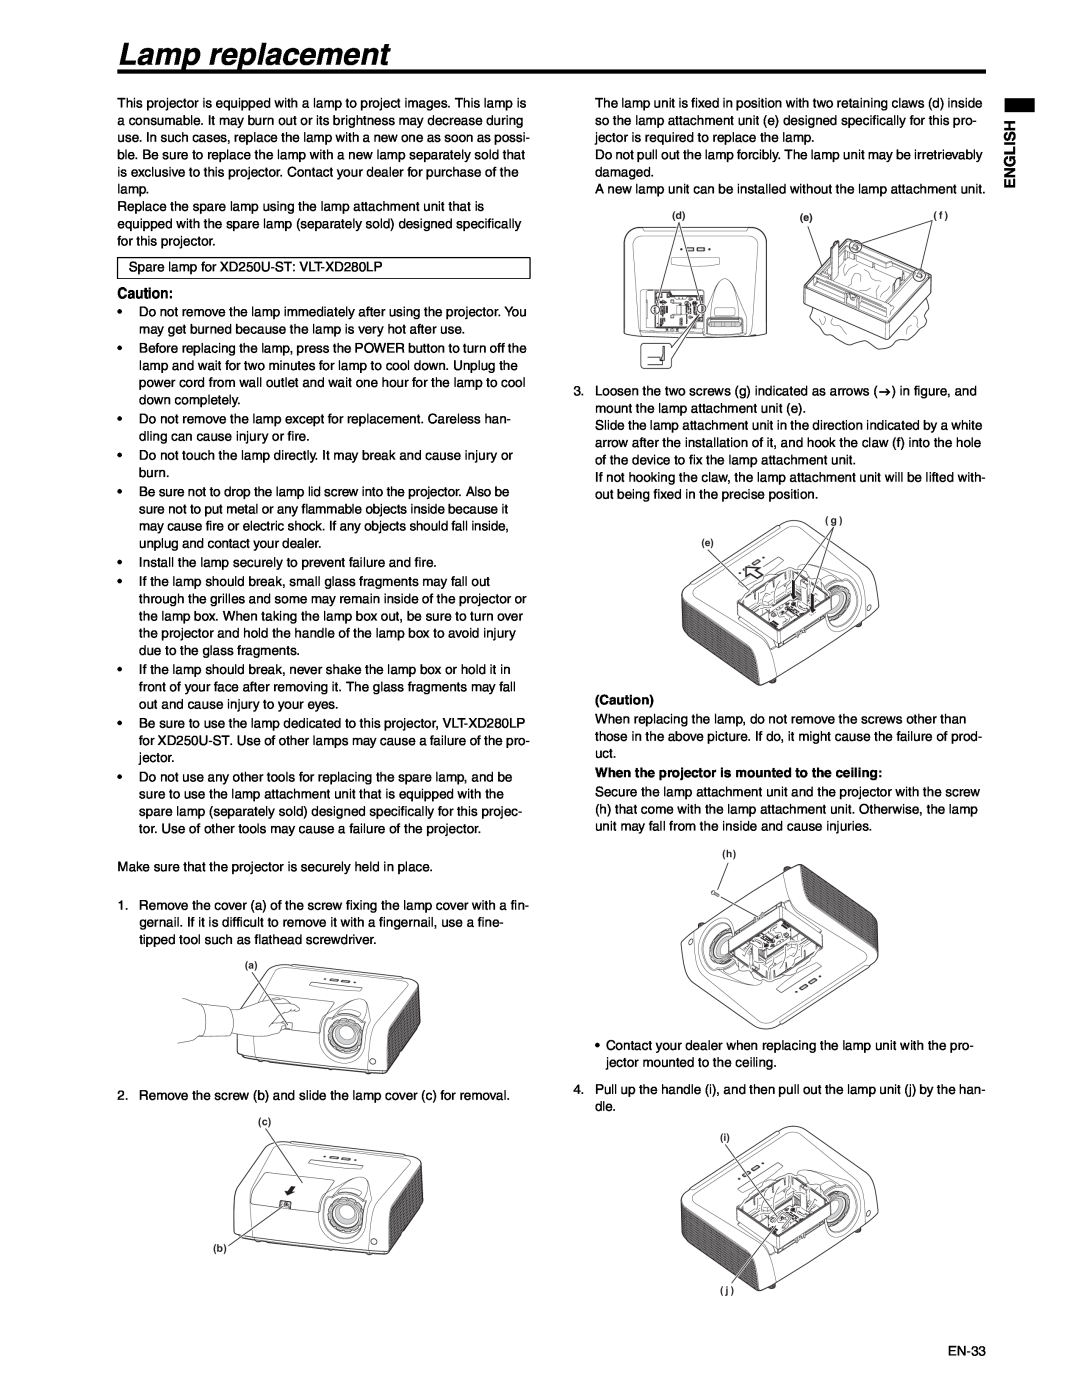 Mitsubishi Electronics XD250U-ST user manual Lamp replacement, English, When the projector is mounted to the ceiling 